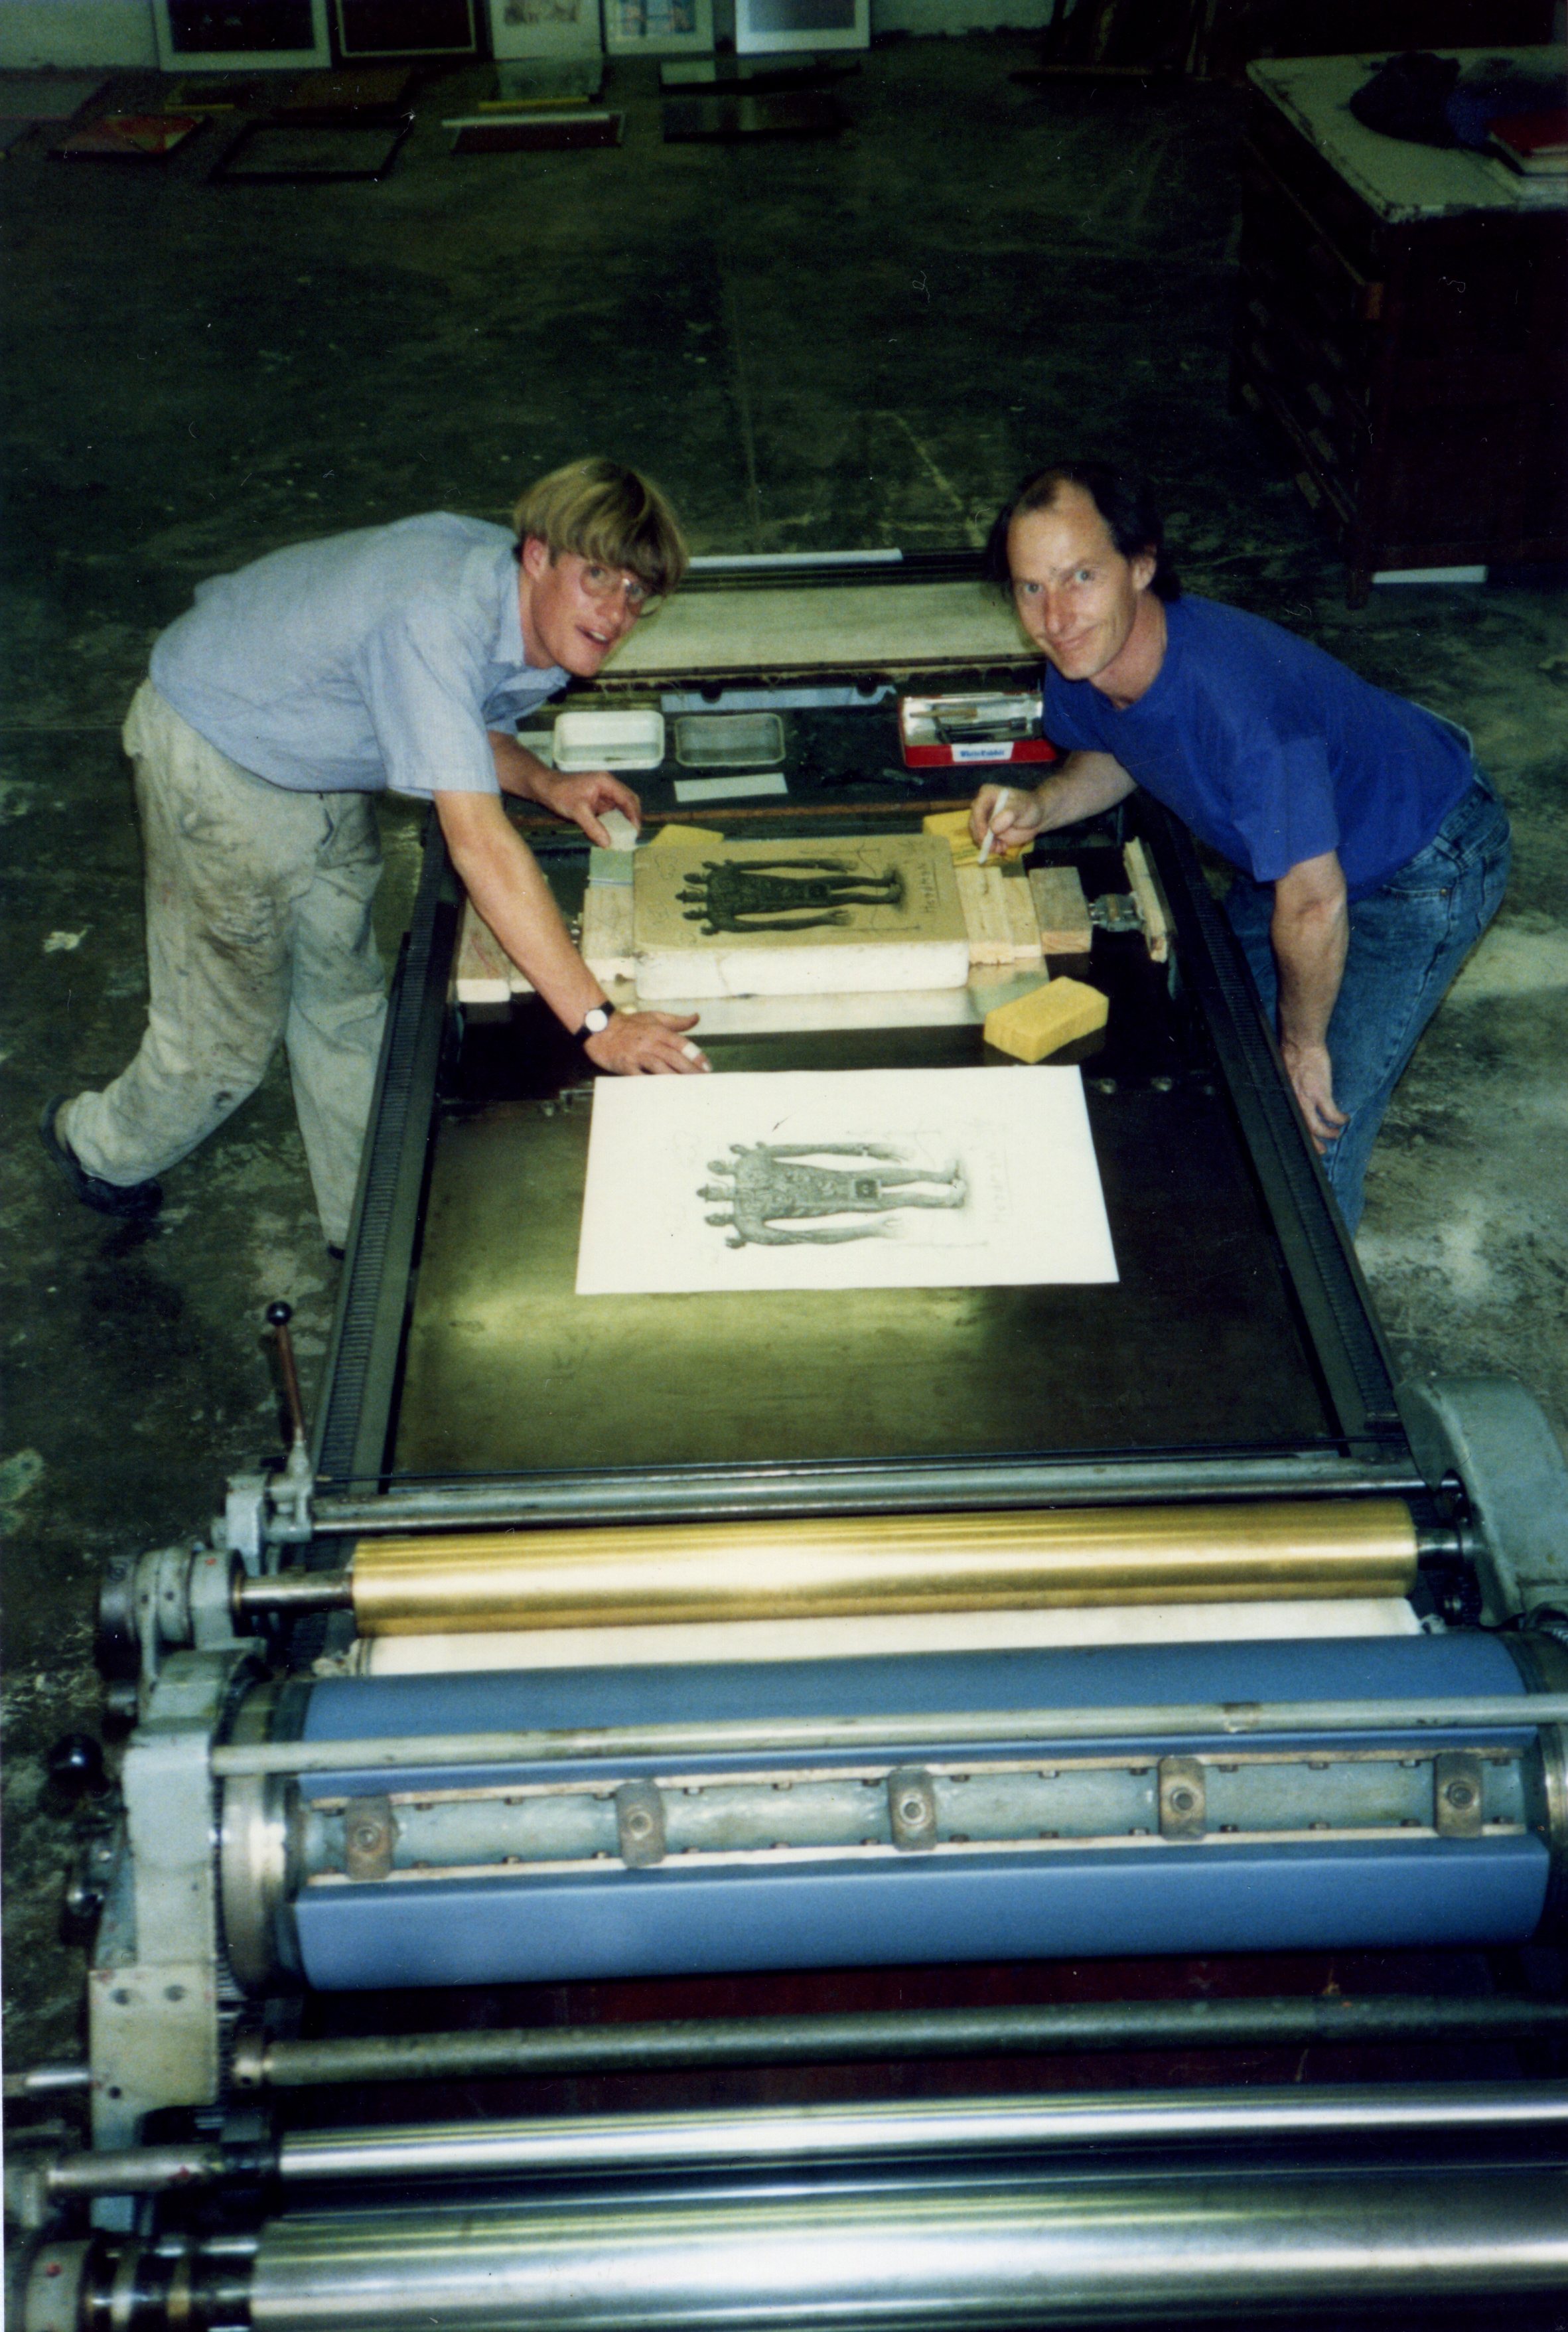 Norman Catherine was the first artist to collaborate with Mark Attwood when he established The Artists' Press in 1991.